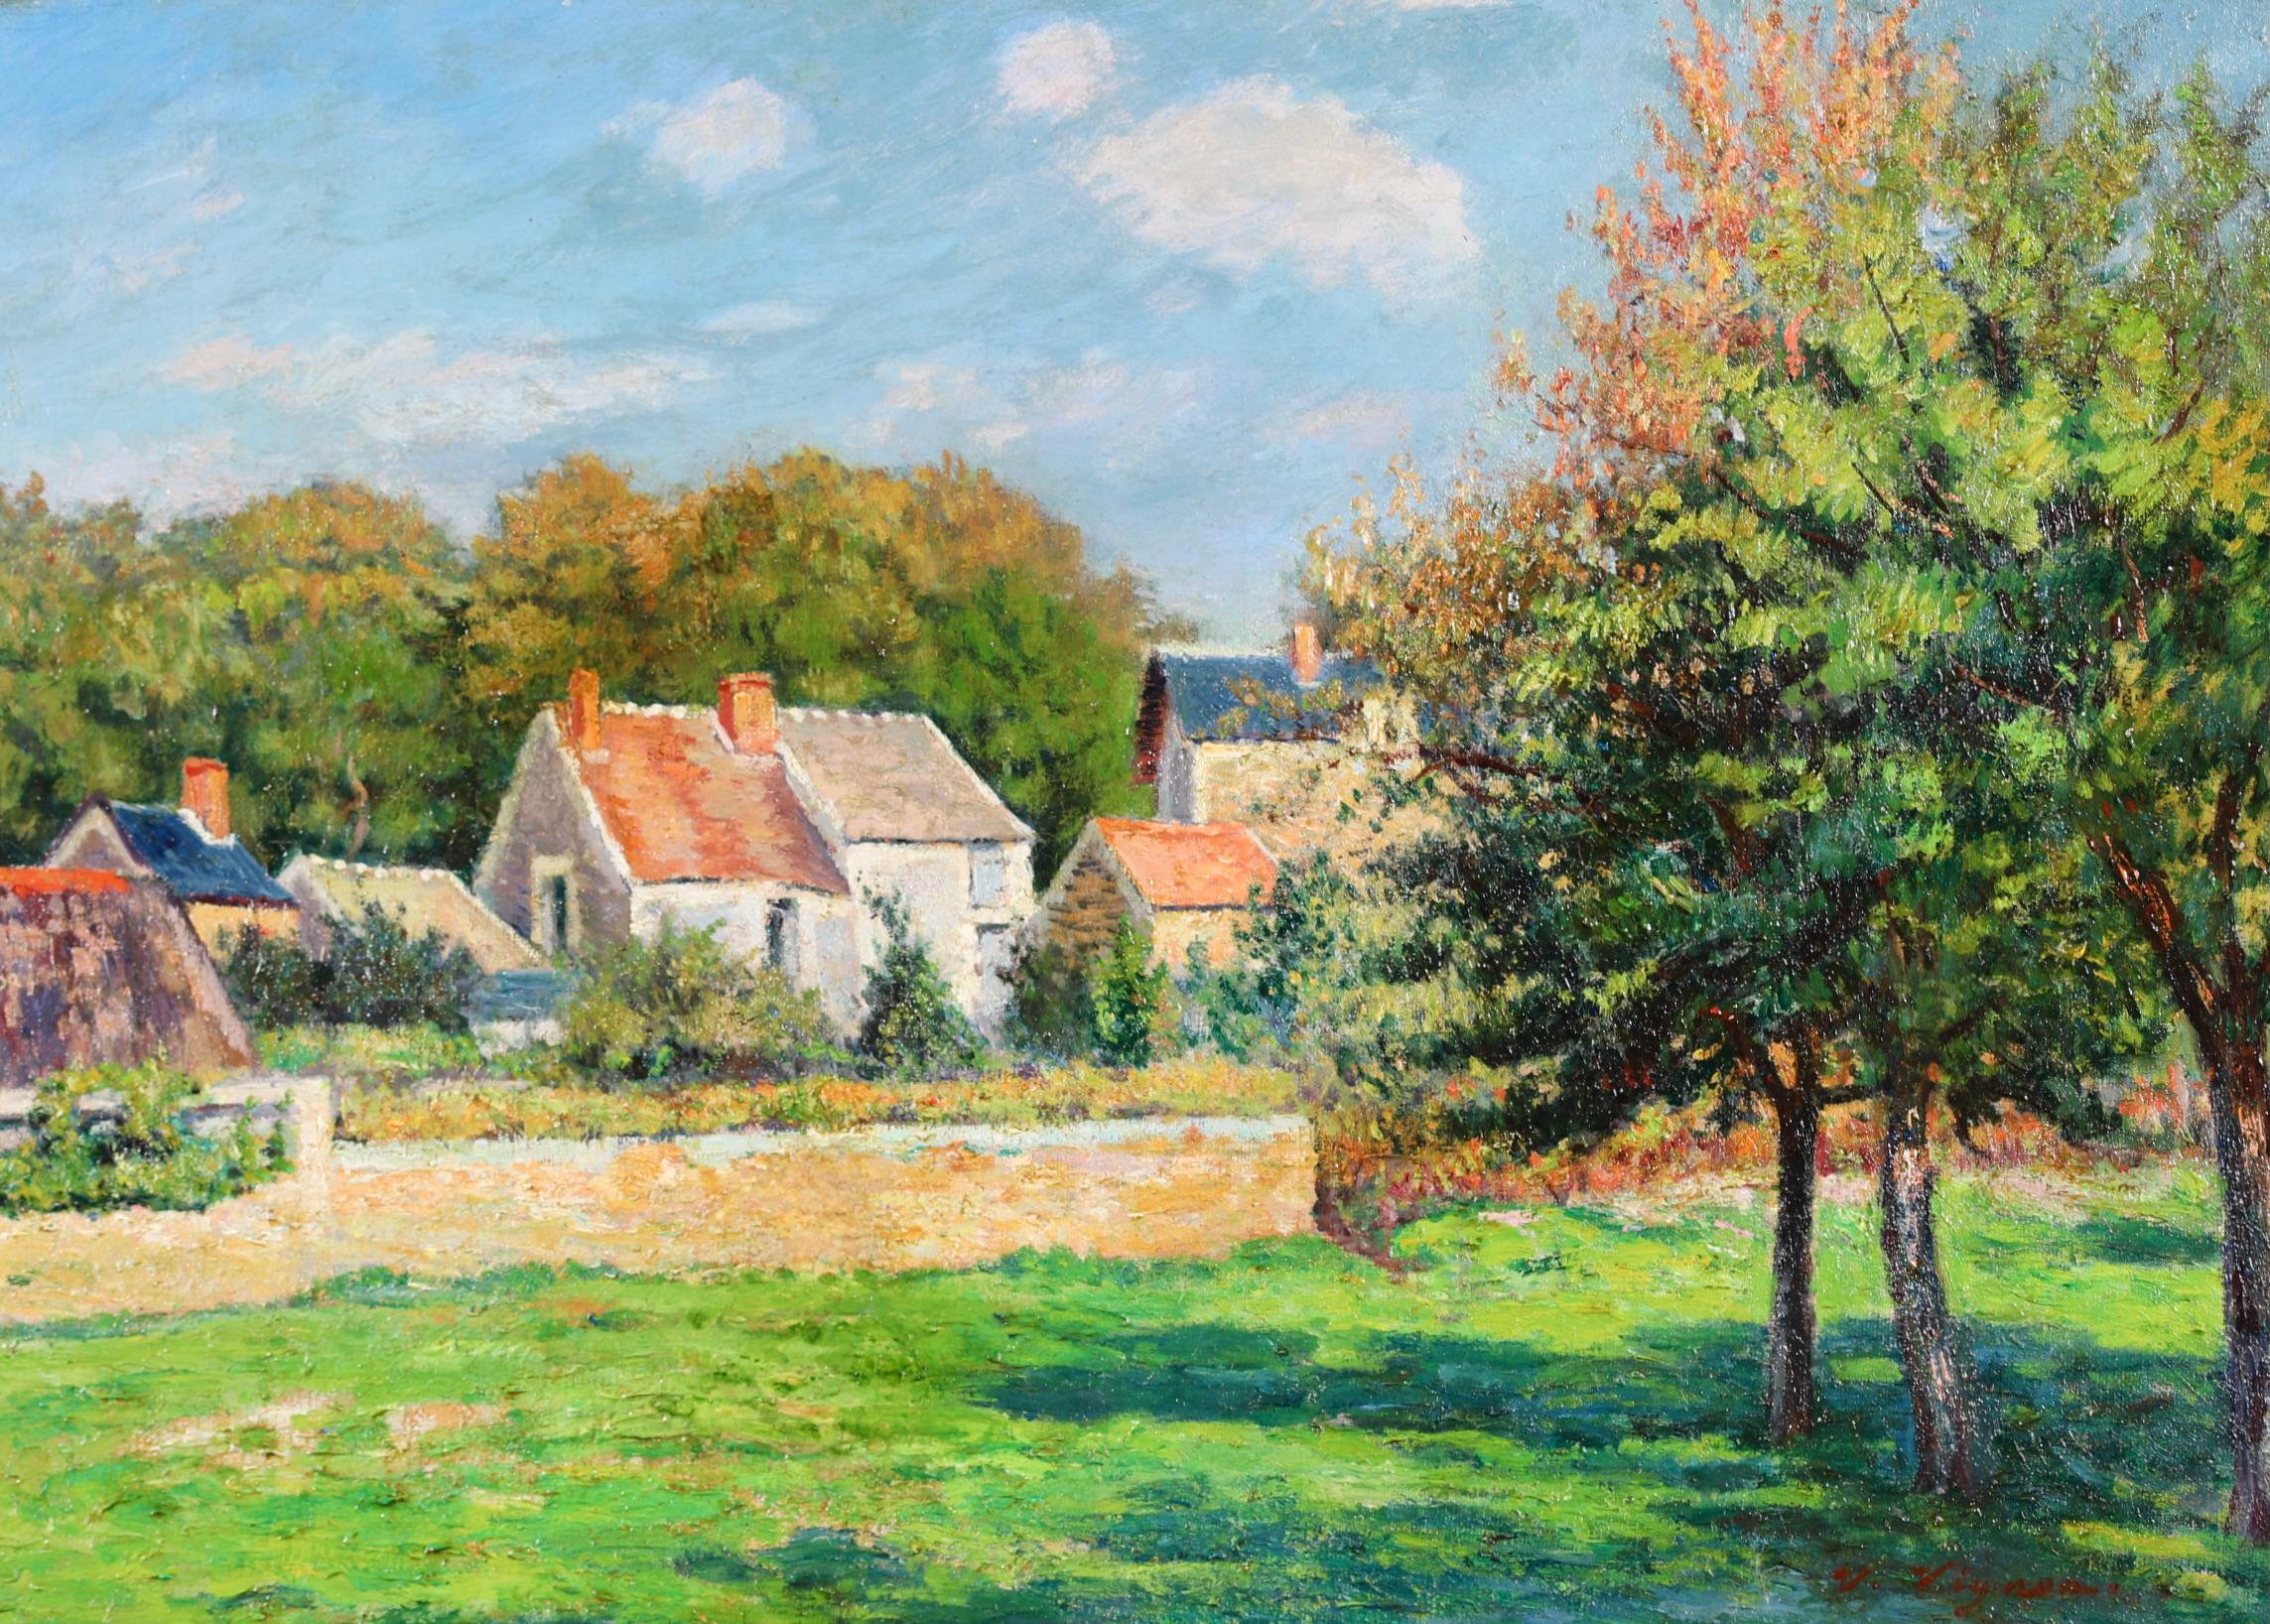 Signed oil on canvas landscape circa 1880 by French impressionist painter Victor Alfred Paul Vignon. The piece depicts farm houses behind a walled garden in a summer landscape. 

Signature:
Signed lower right

Dimensions:
Framed: 21